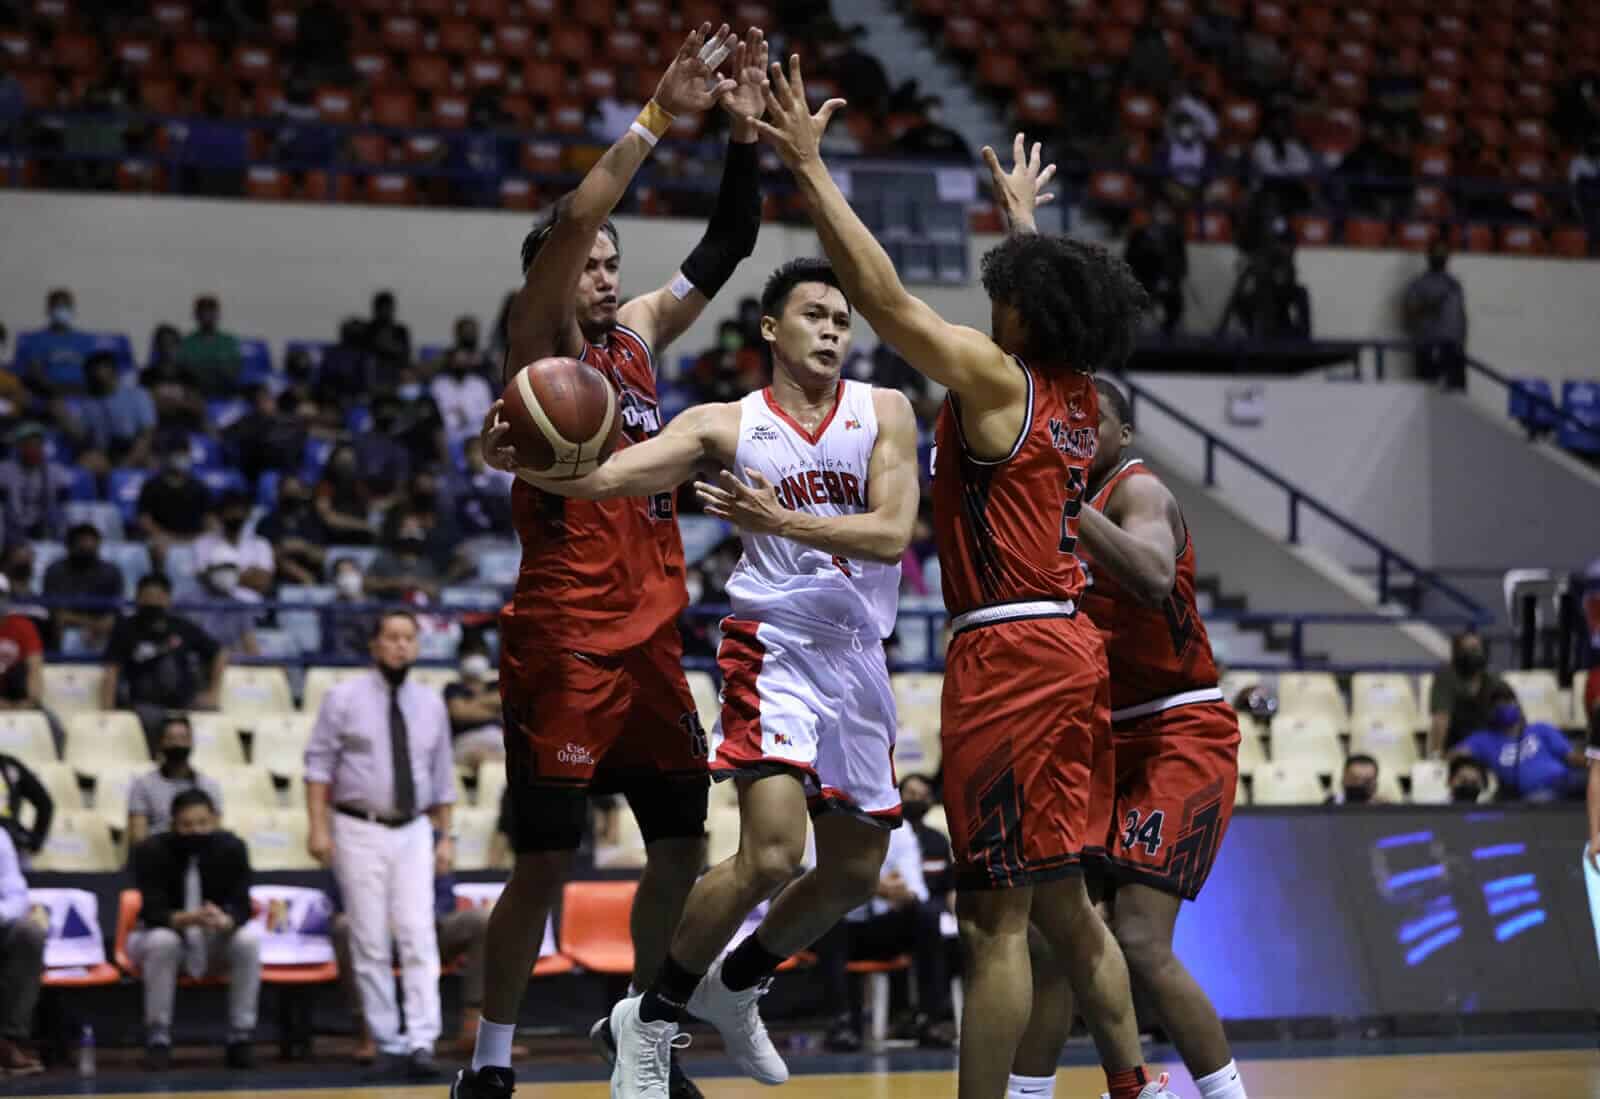 A group of basketball players blocking the ball during a win by Barangay Ginebra.